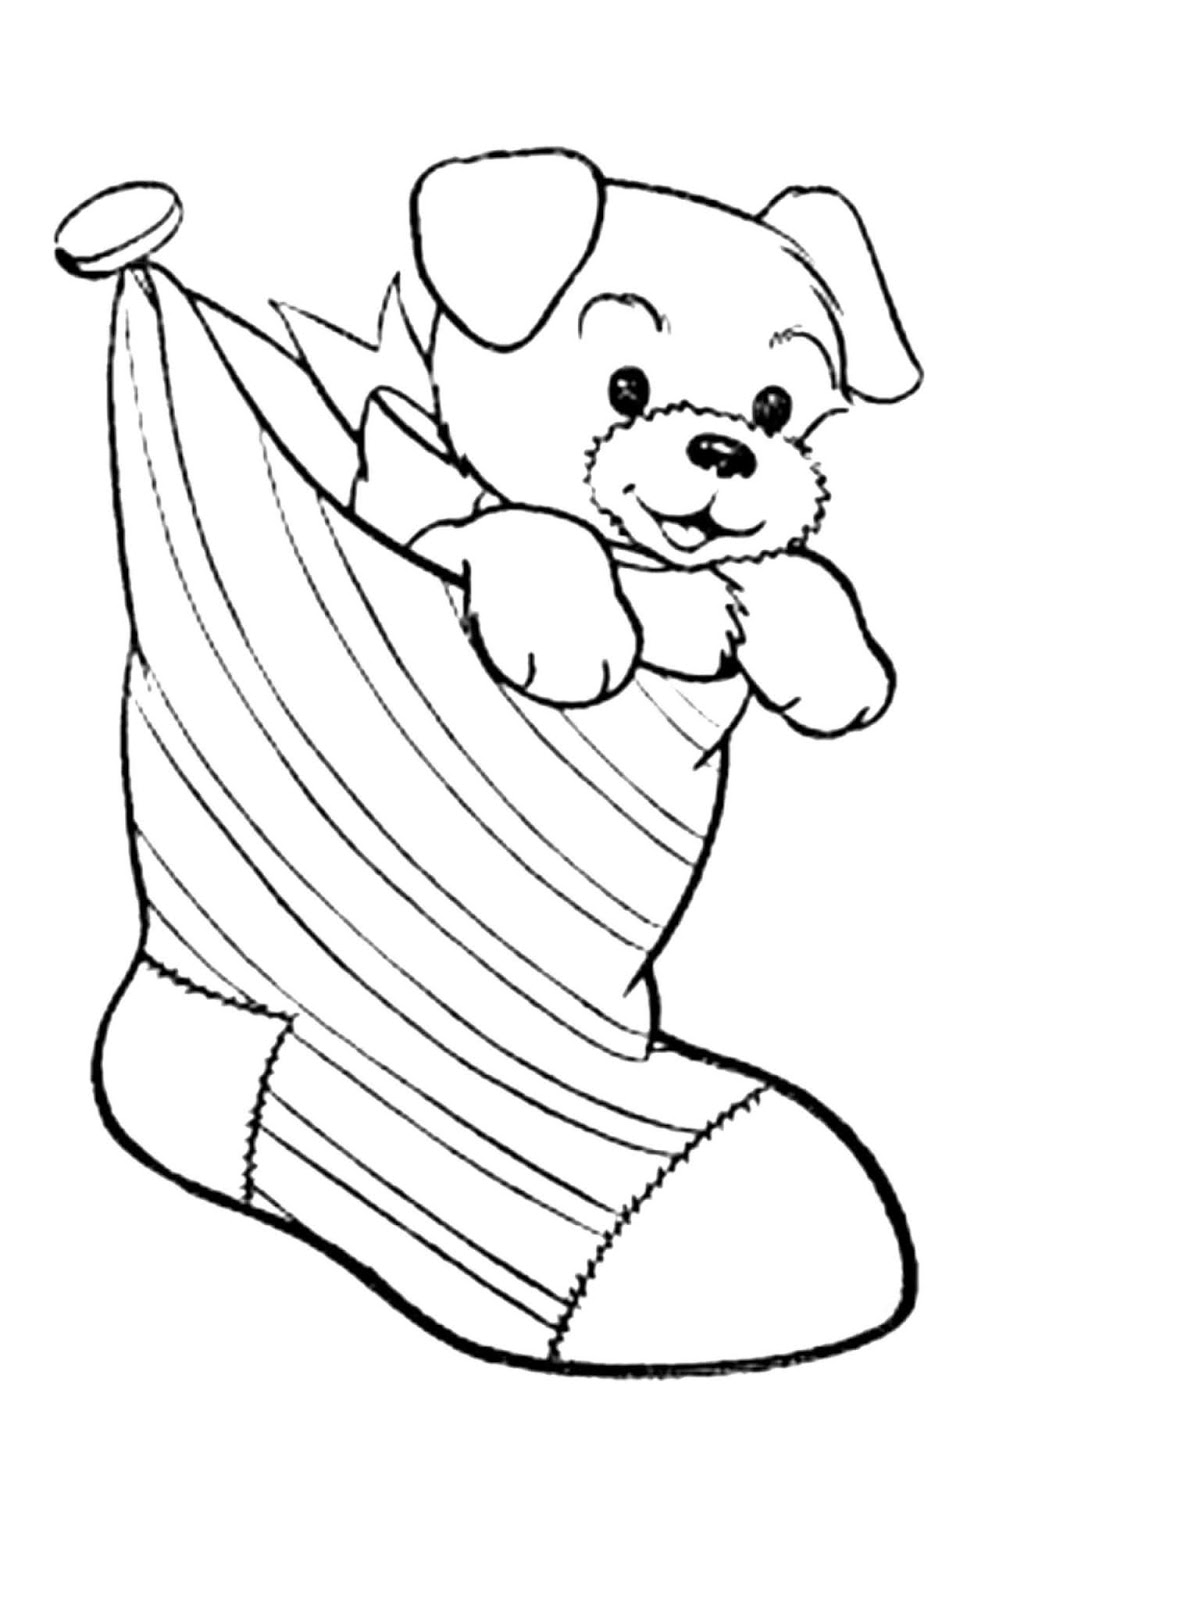 10+ National Puppy Day Coloring Pages for Kids and Preschool 